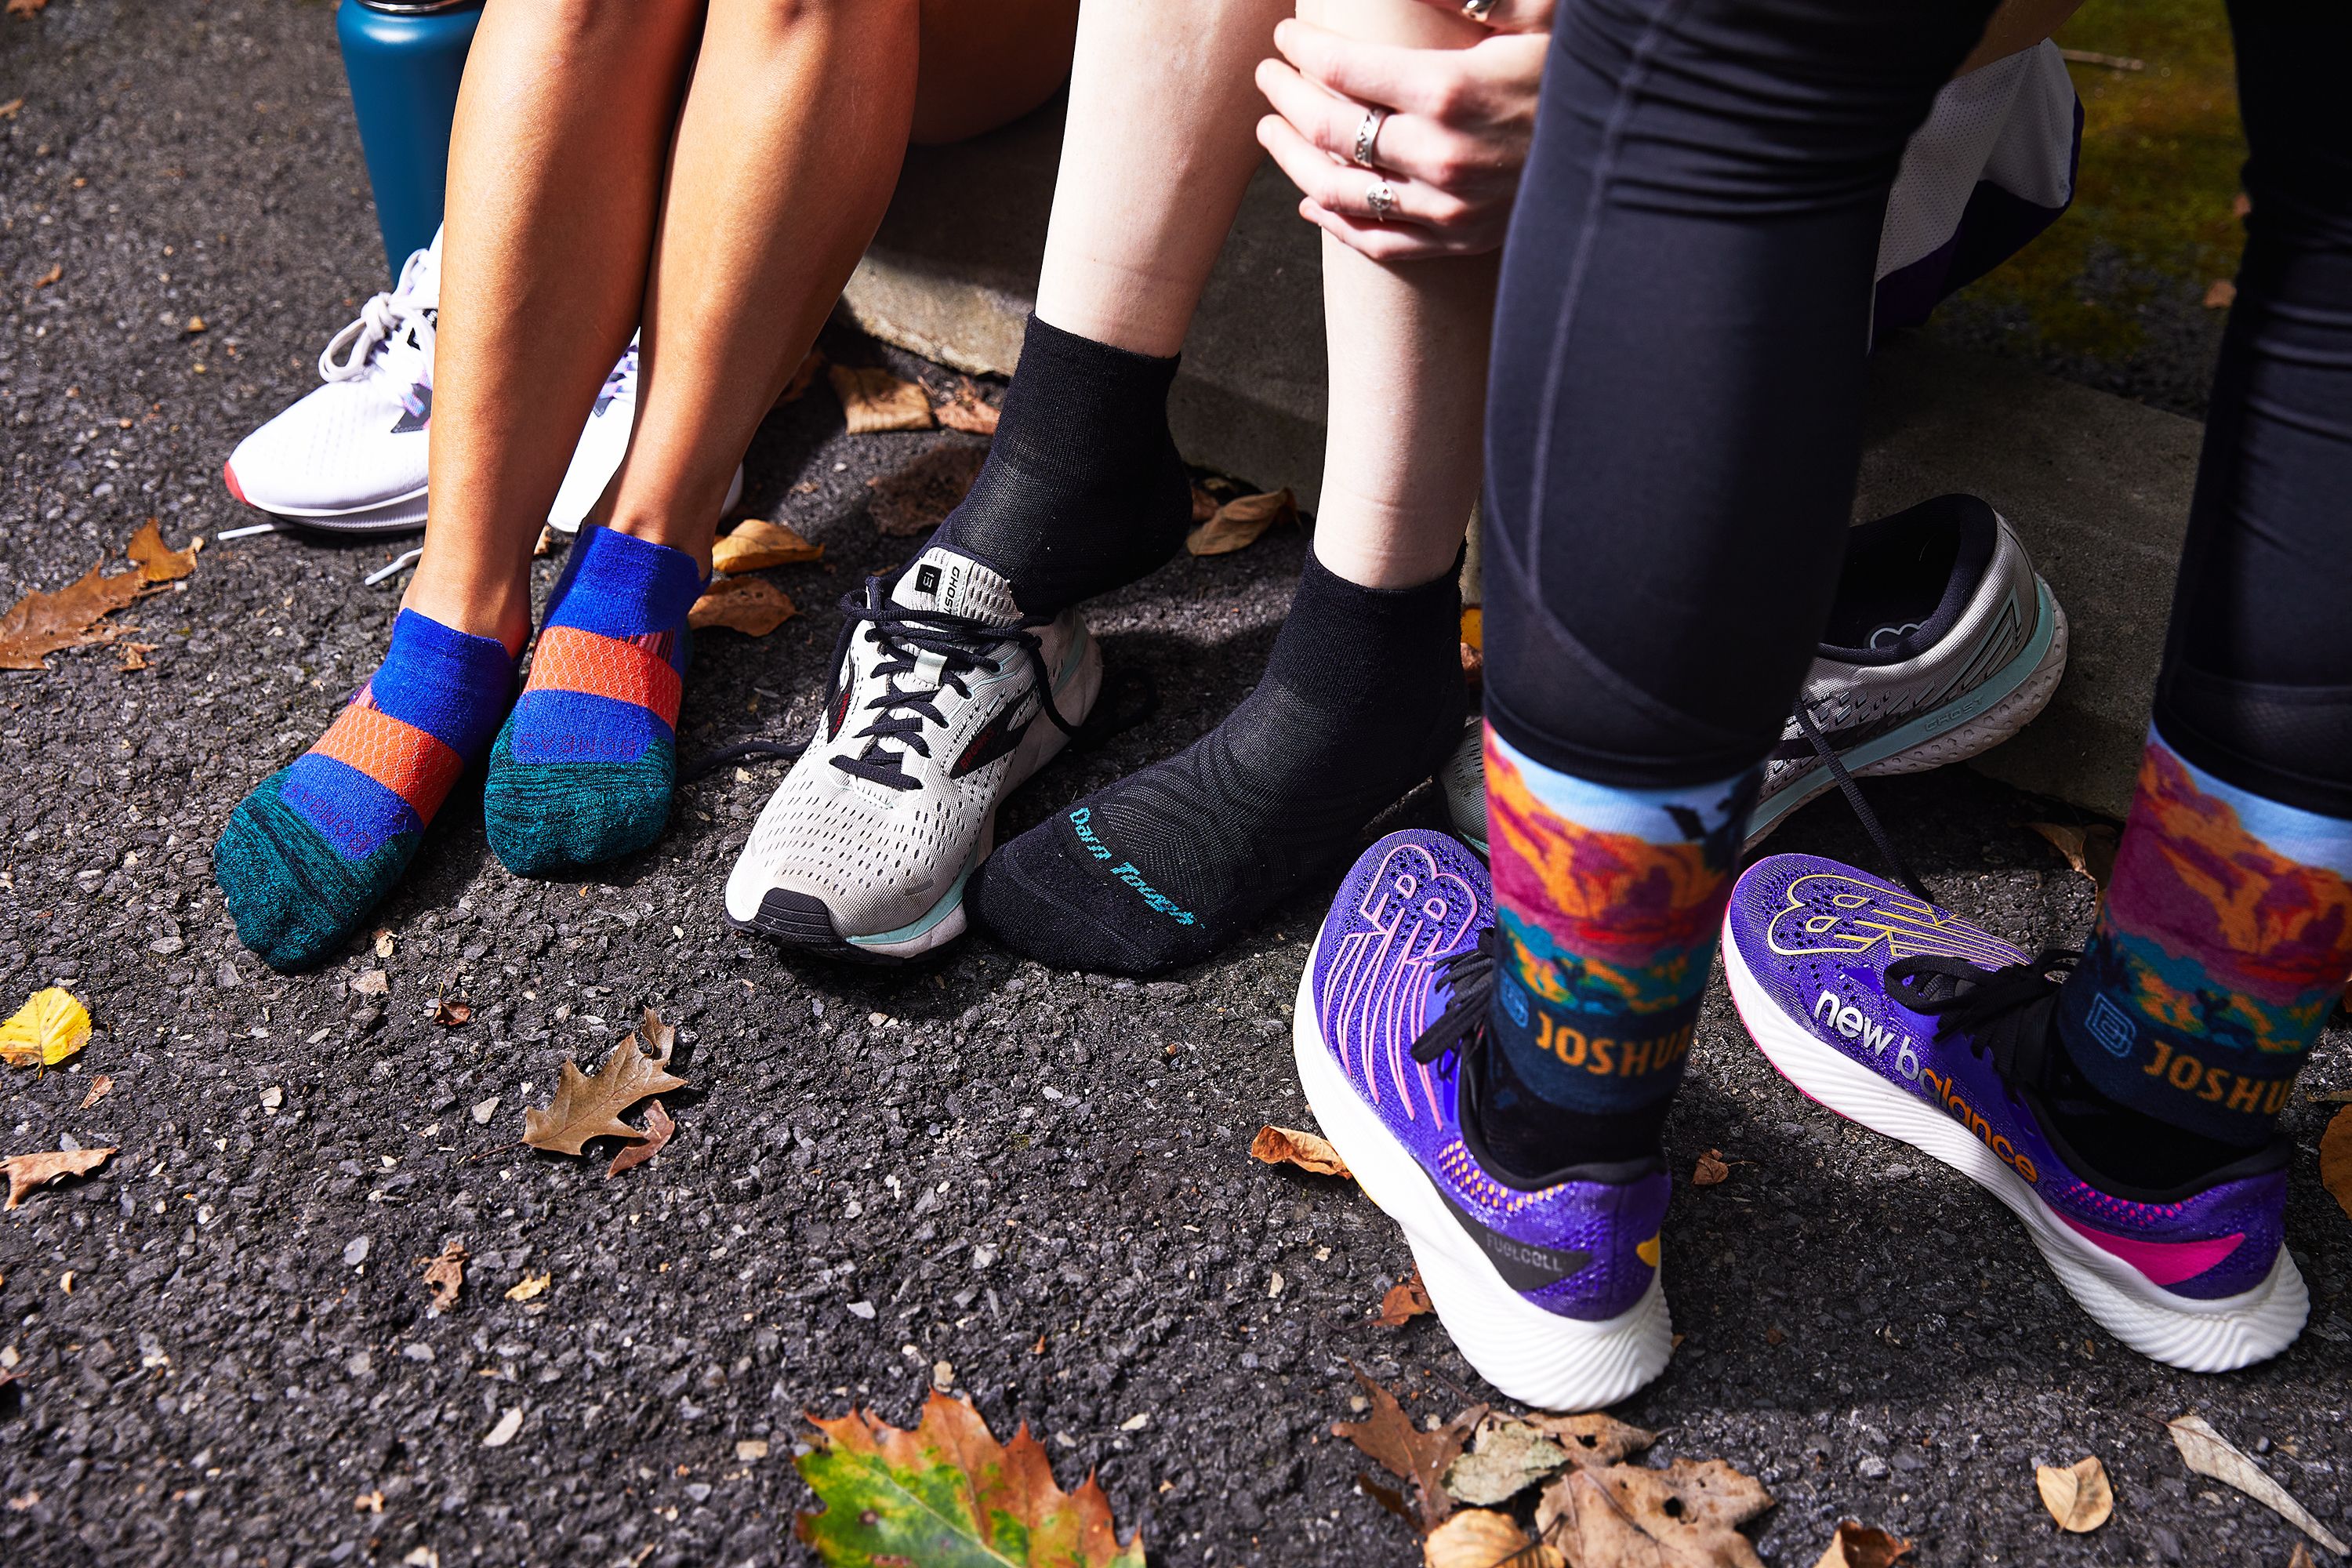 III. Factors to Consider When Choosing the Right Socks for Running Comfort